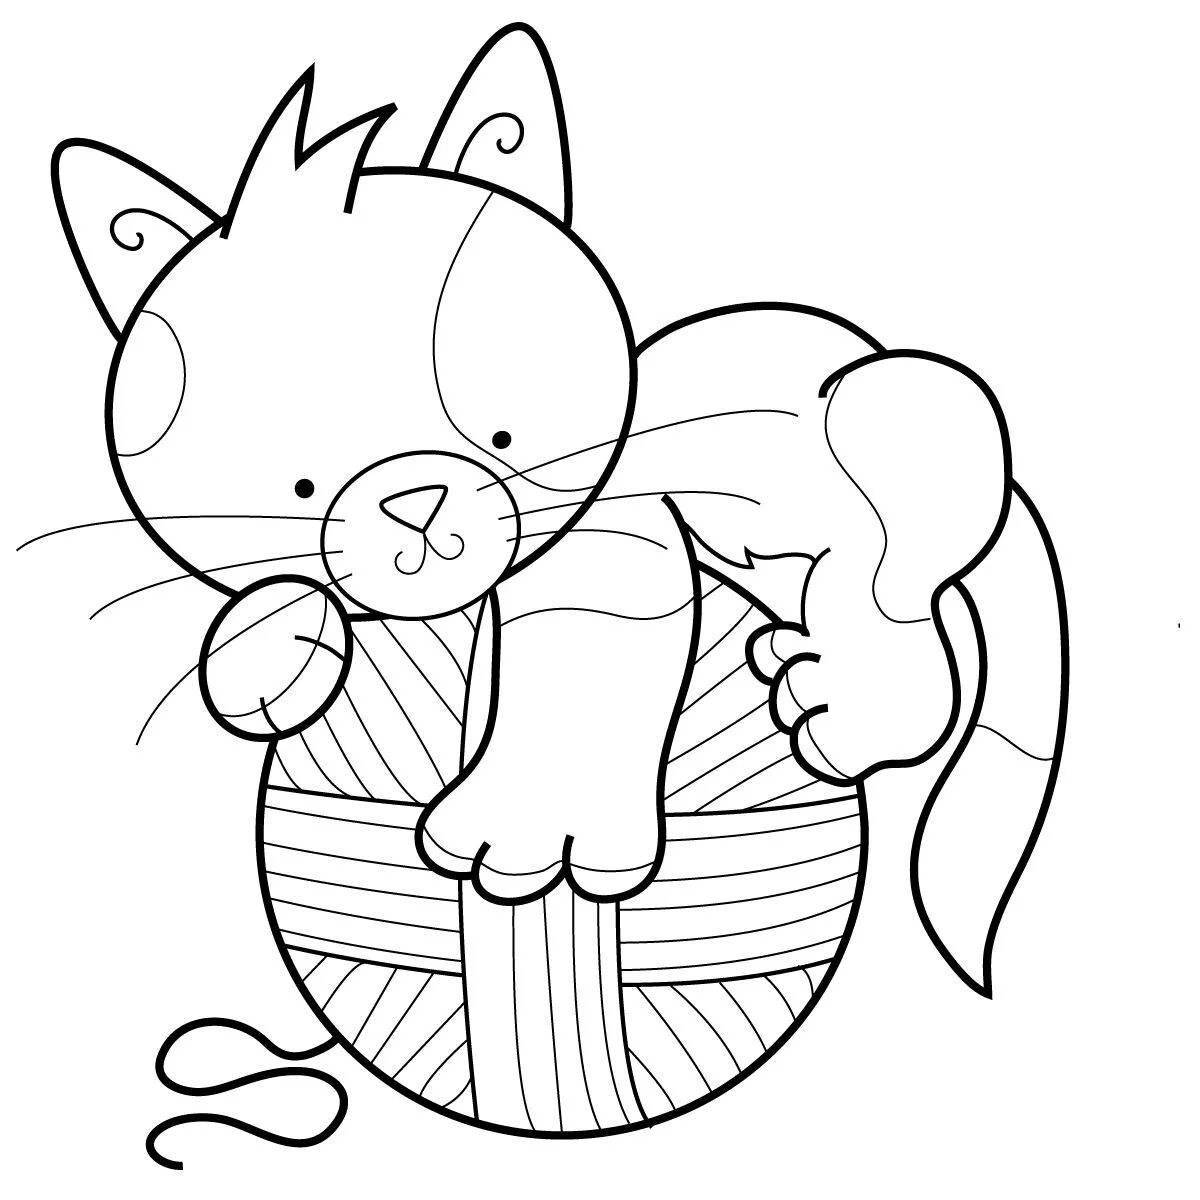 Coloring book inquisitive kitten with a ball